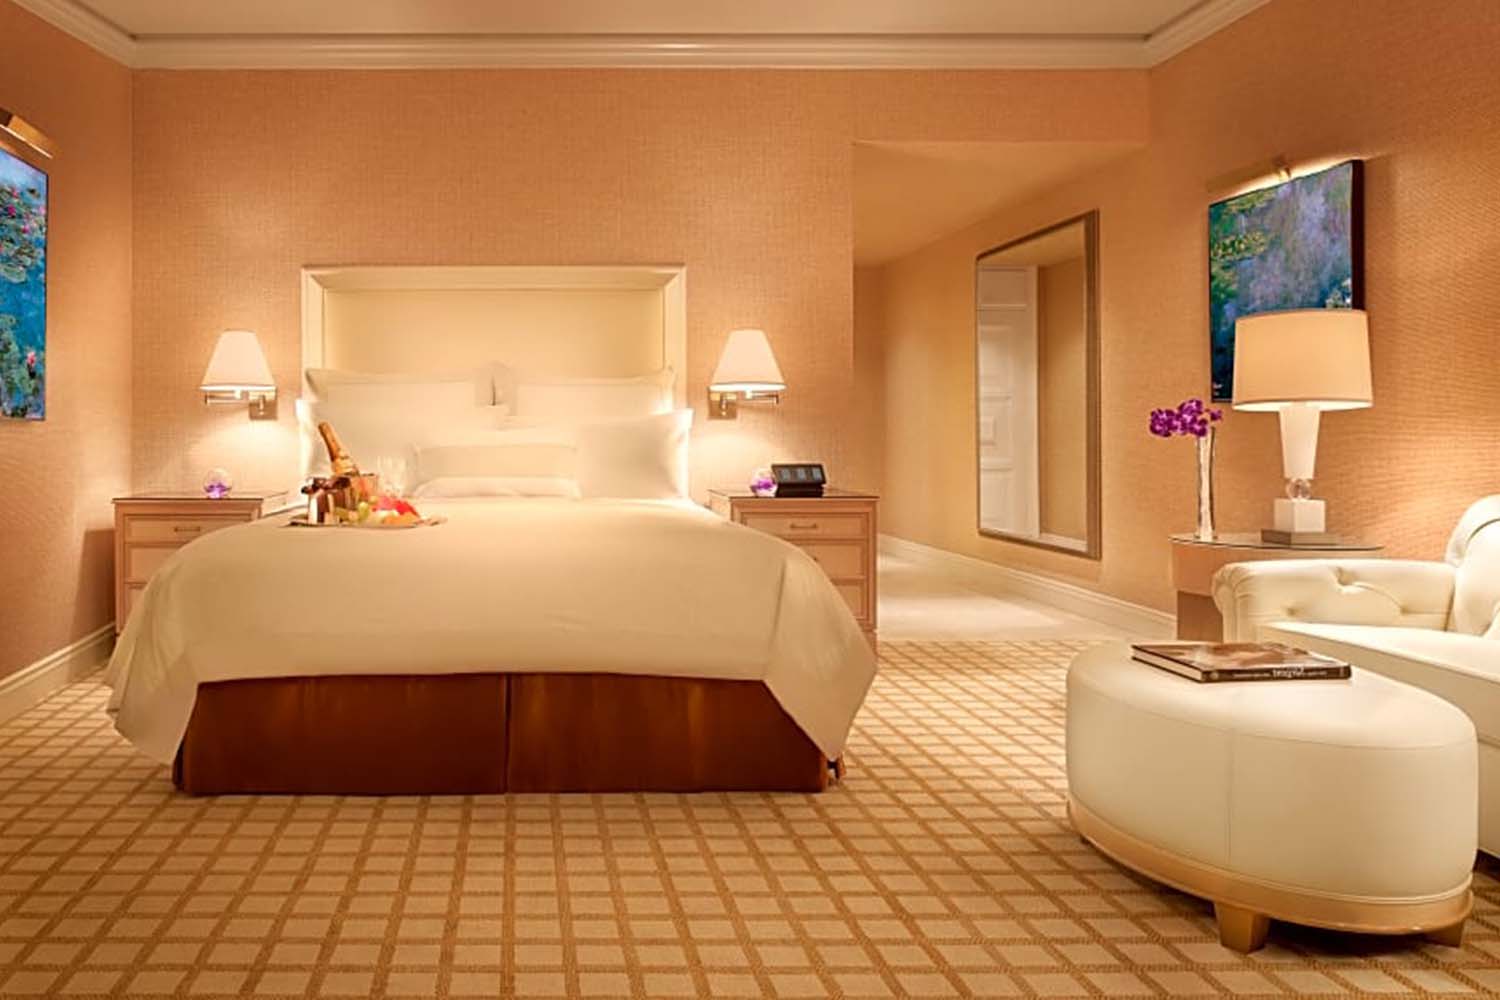 Wynn Las Vegas - We are honored to have the first Louis Vuitton